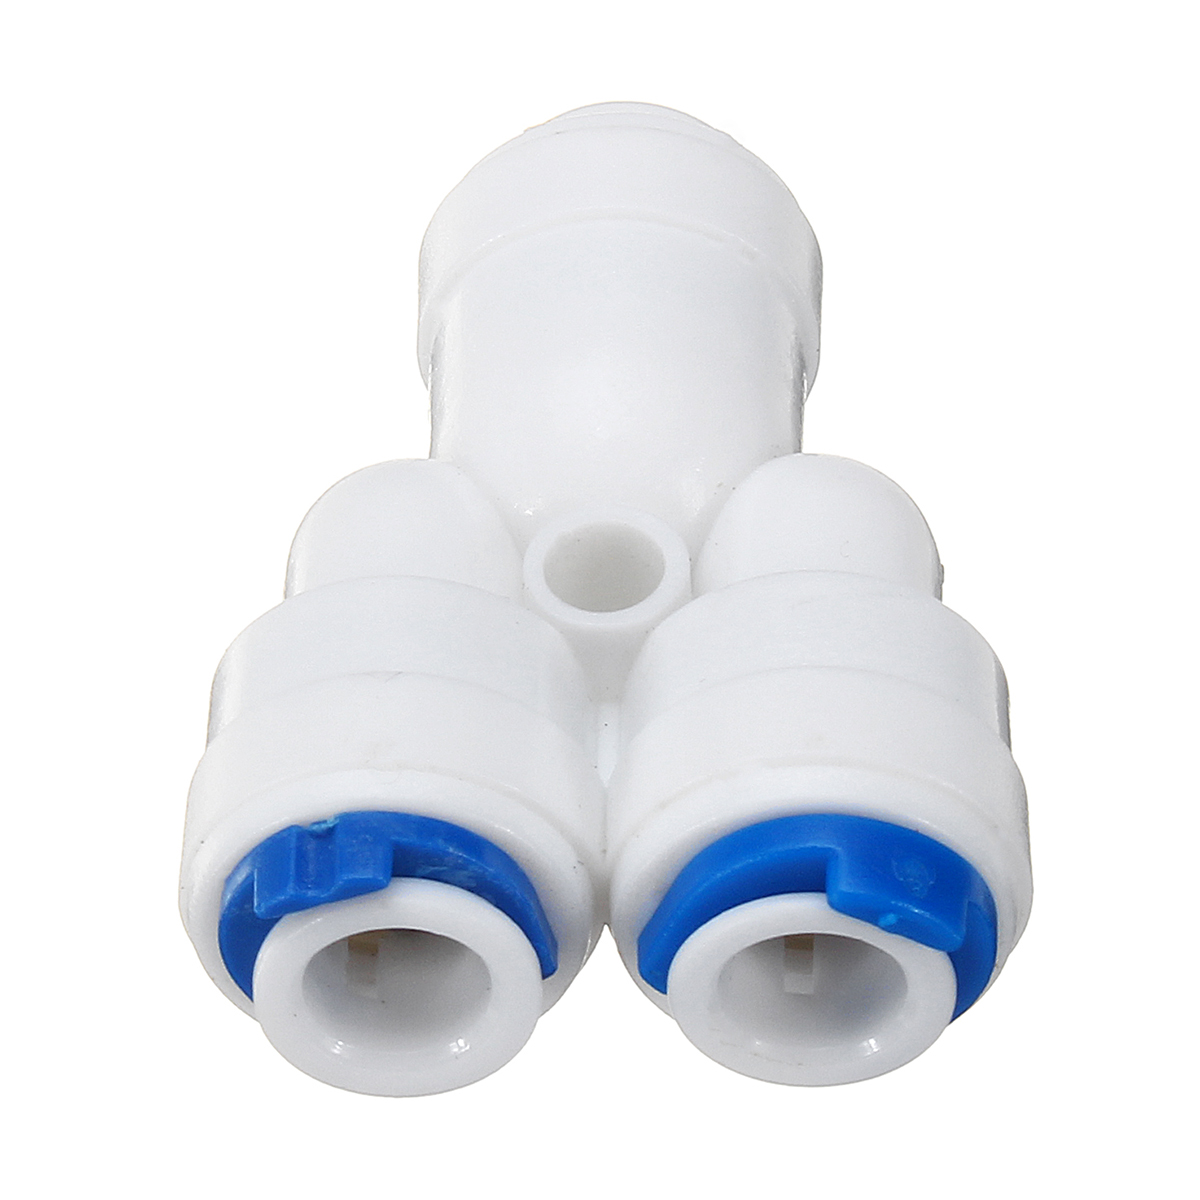 14-Inch-RO-Grade-Y-Type-Water-Tube-Quick-Connect-Parts-Fittings-Connection-Pipes-for-Water-Filters-1378010